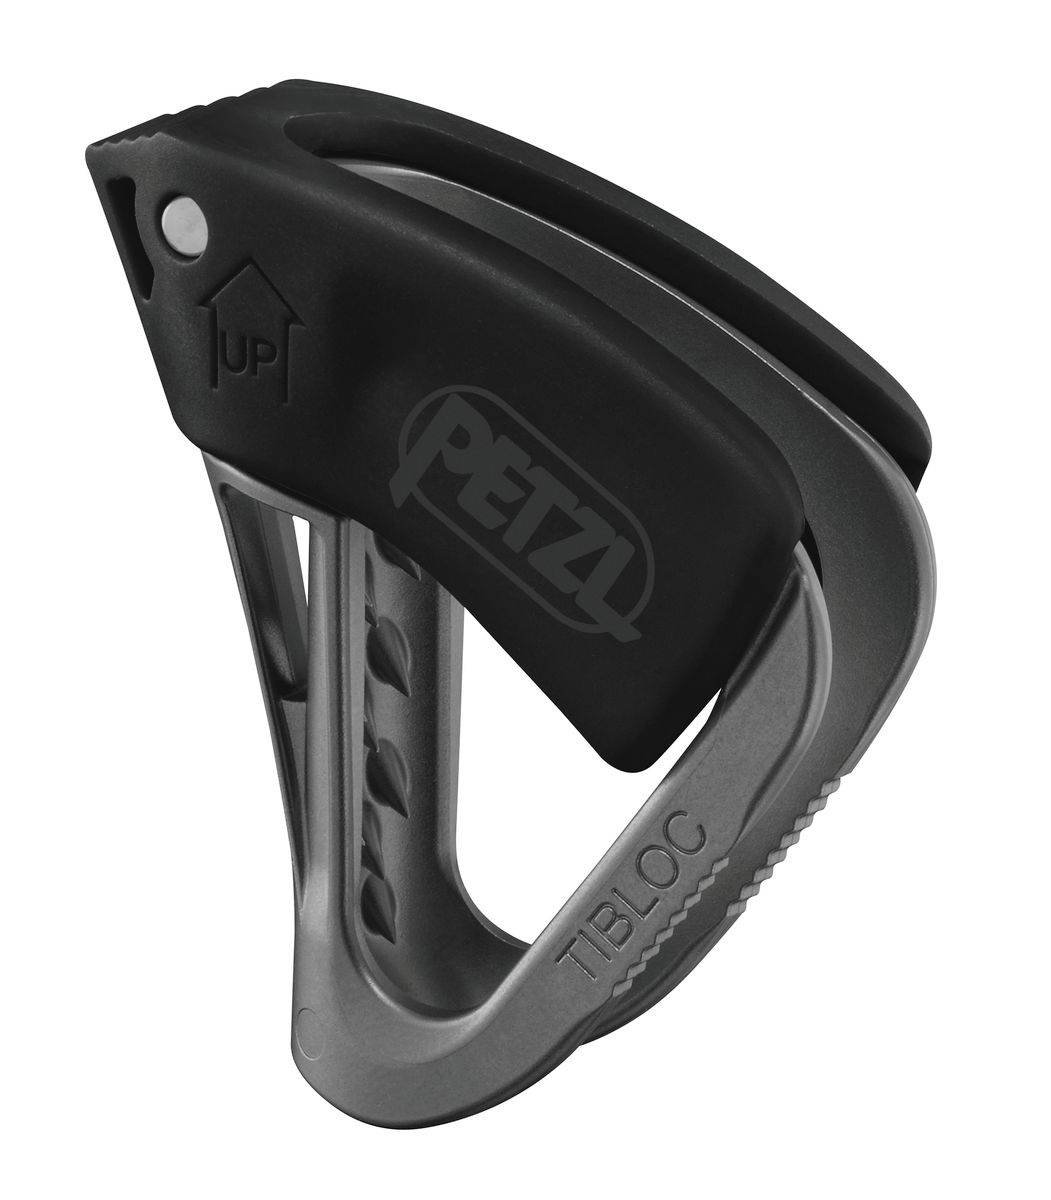 NEW Petzl Basic Ascender compact rope ascender for rescue and rope access work 